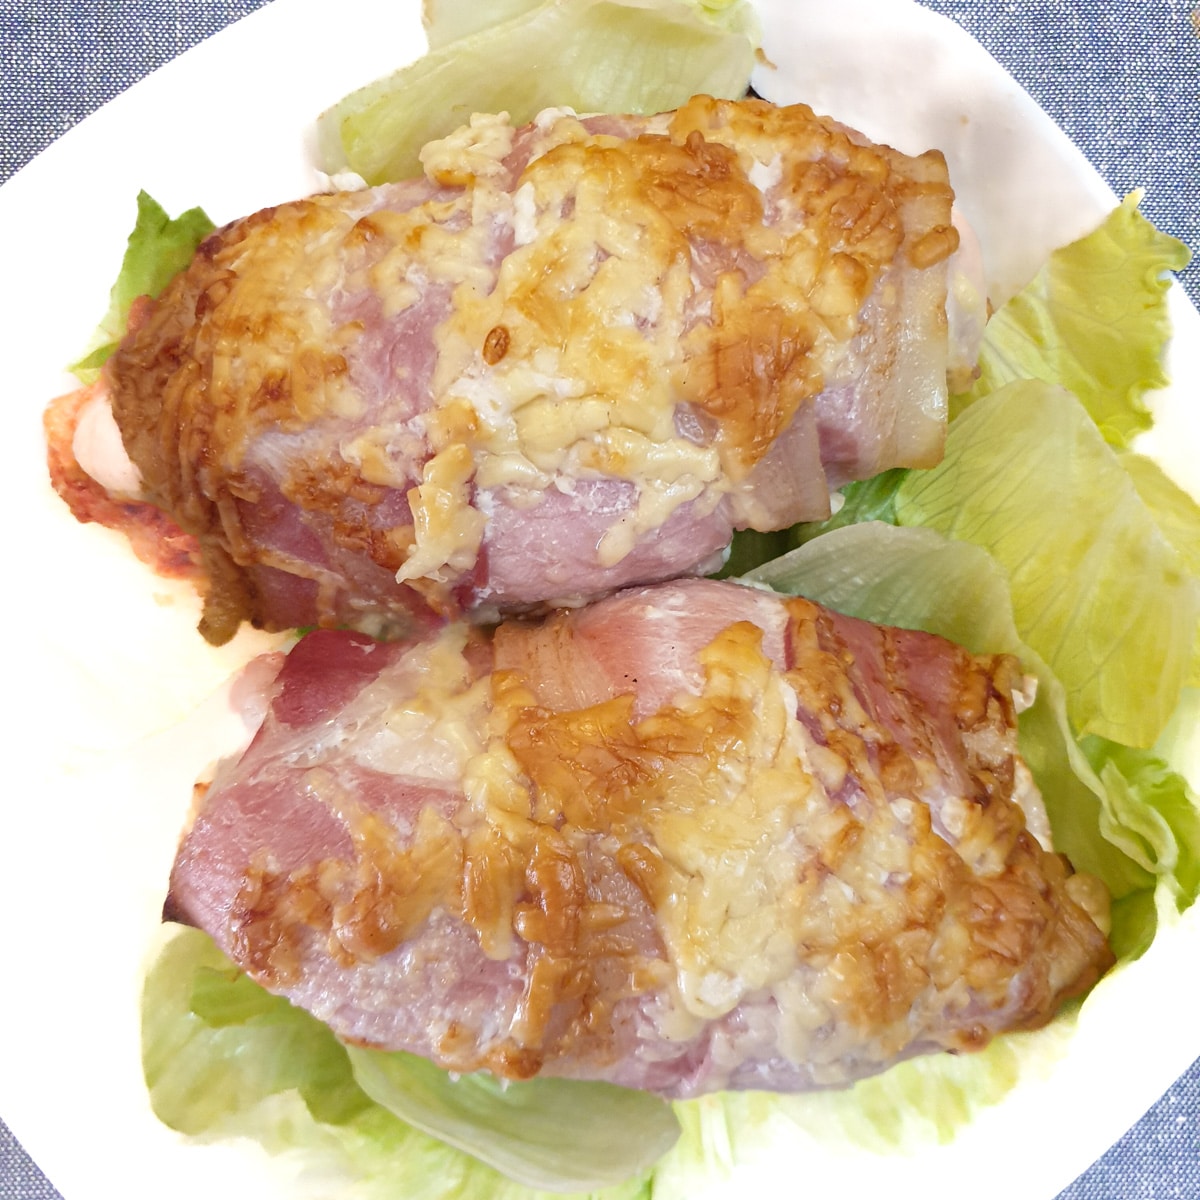 Two bacon wrapped chicken breasts on a bed of lettuce on a white plate.